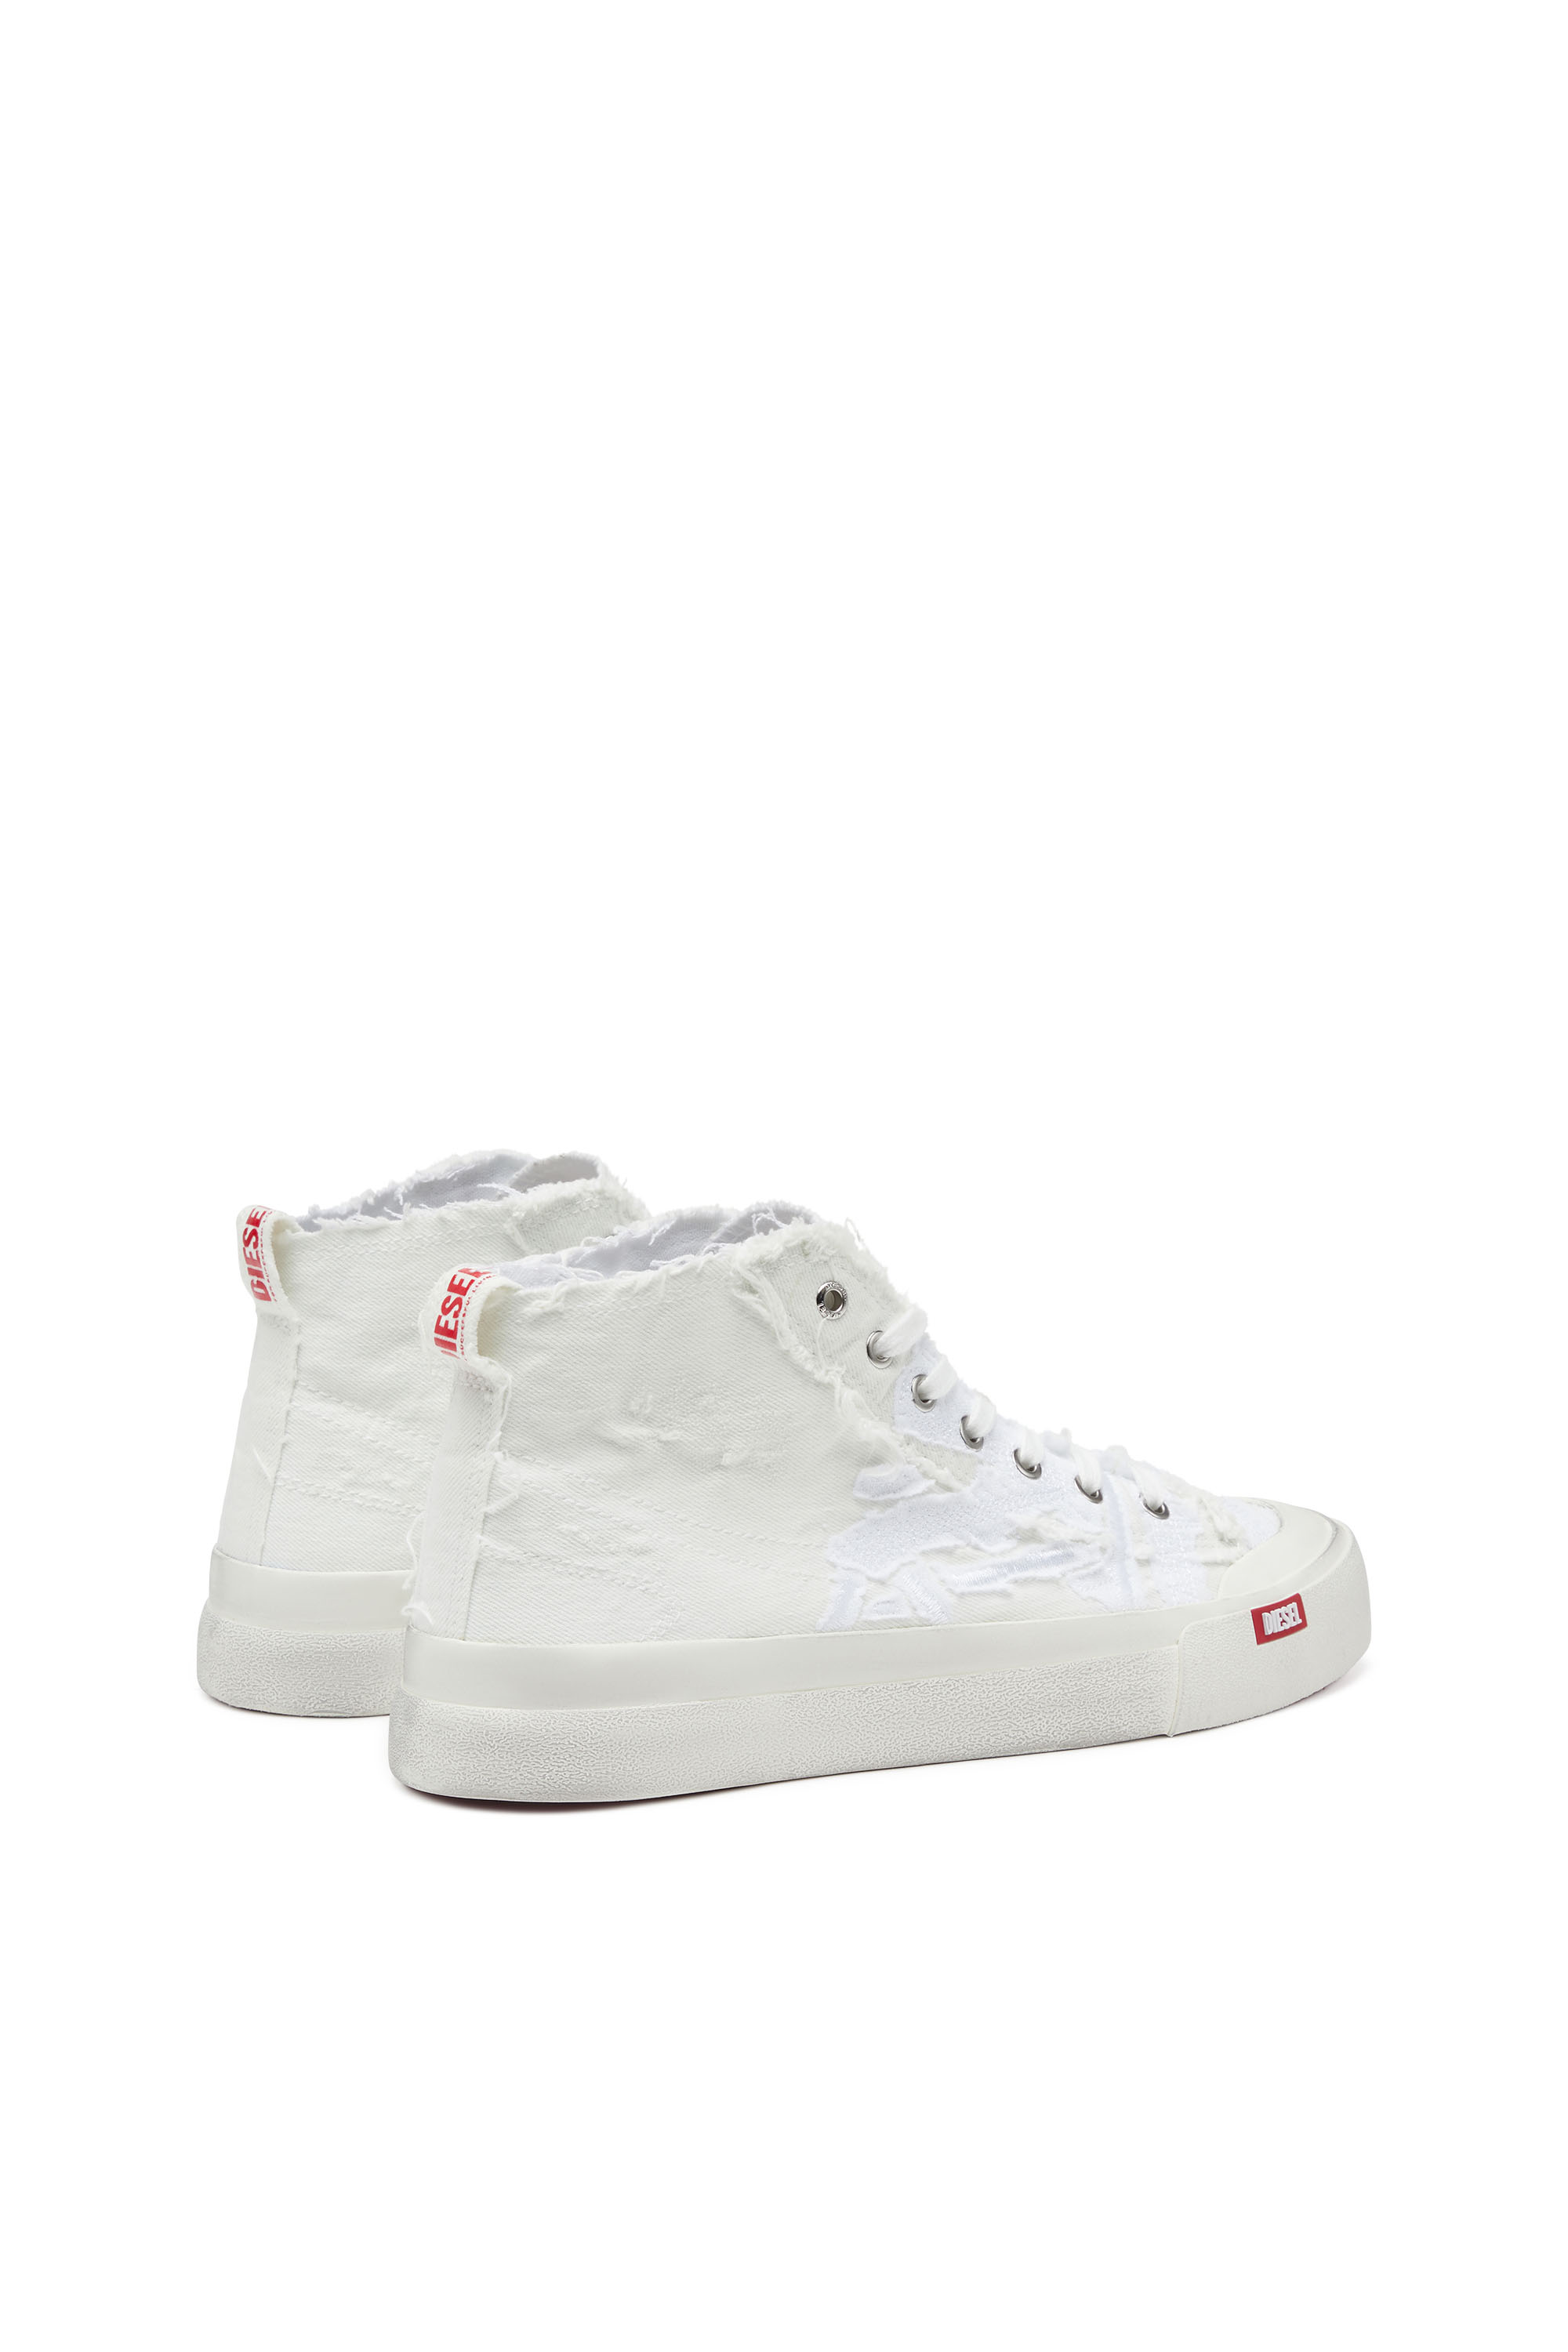 Diesel - S-ATHOS MID, Man S-Athos Mid-Destroyed gauze and denim high-top sneakers in White - Image 3